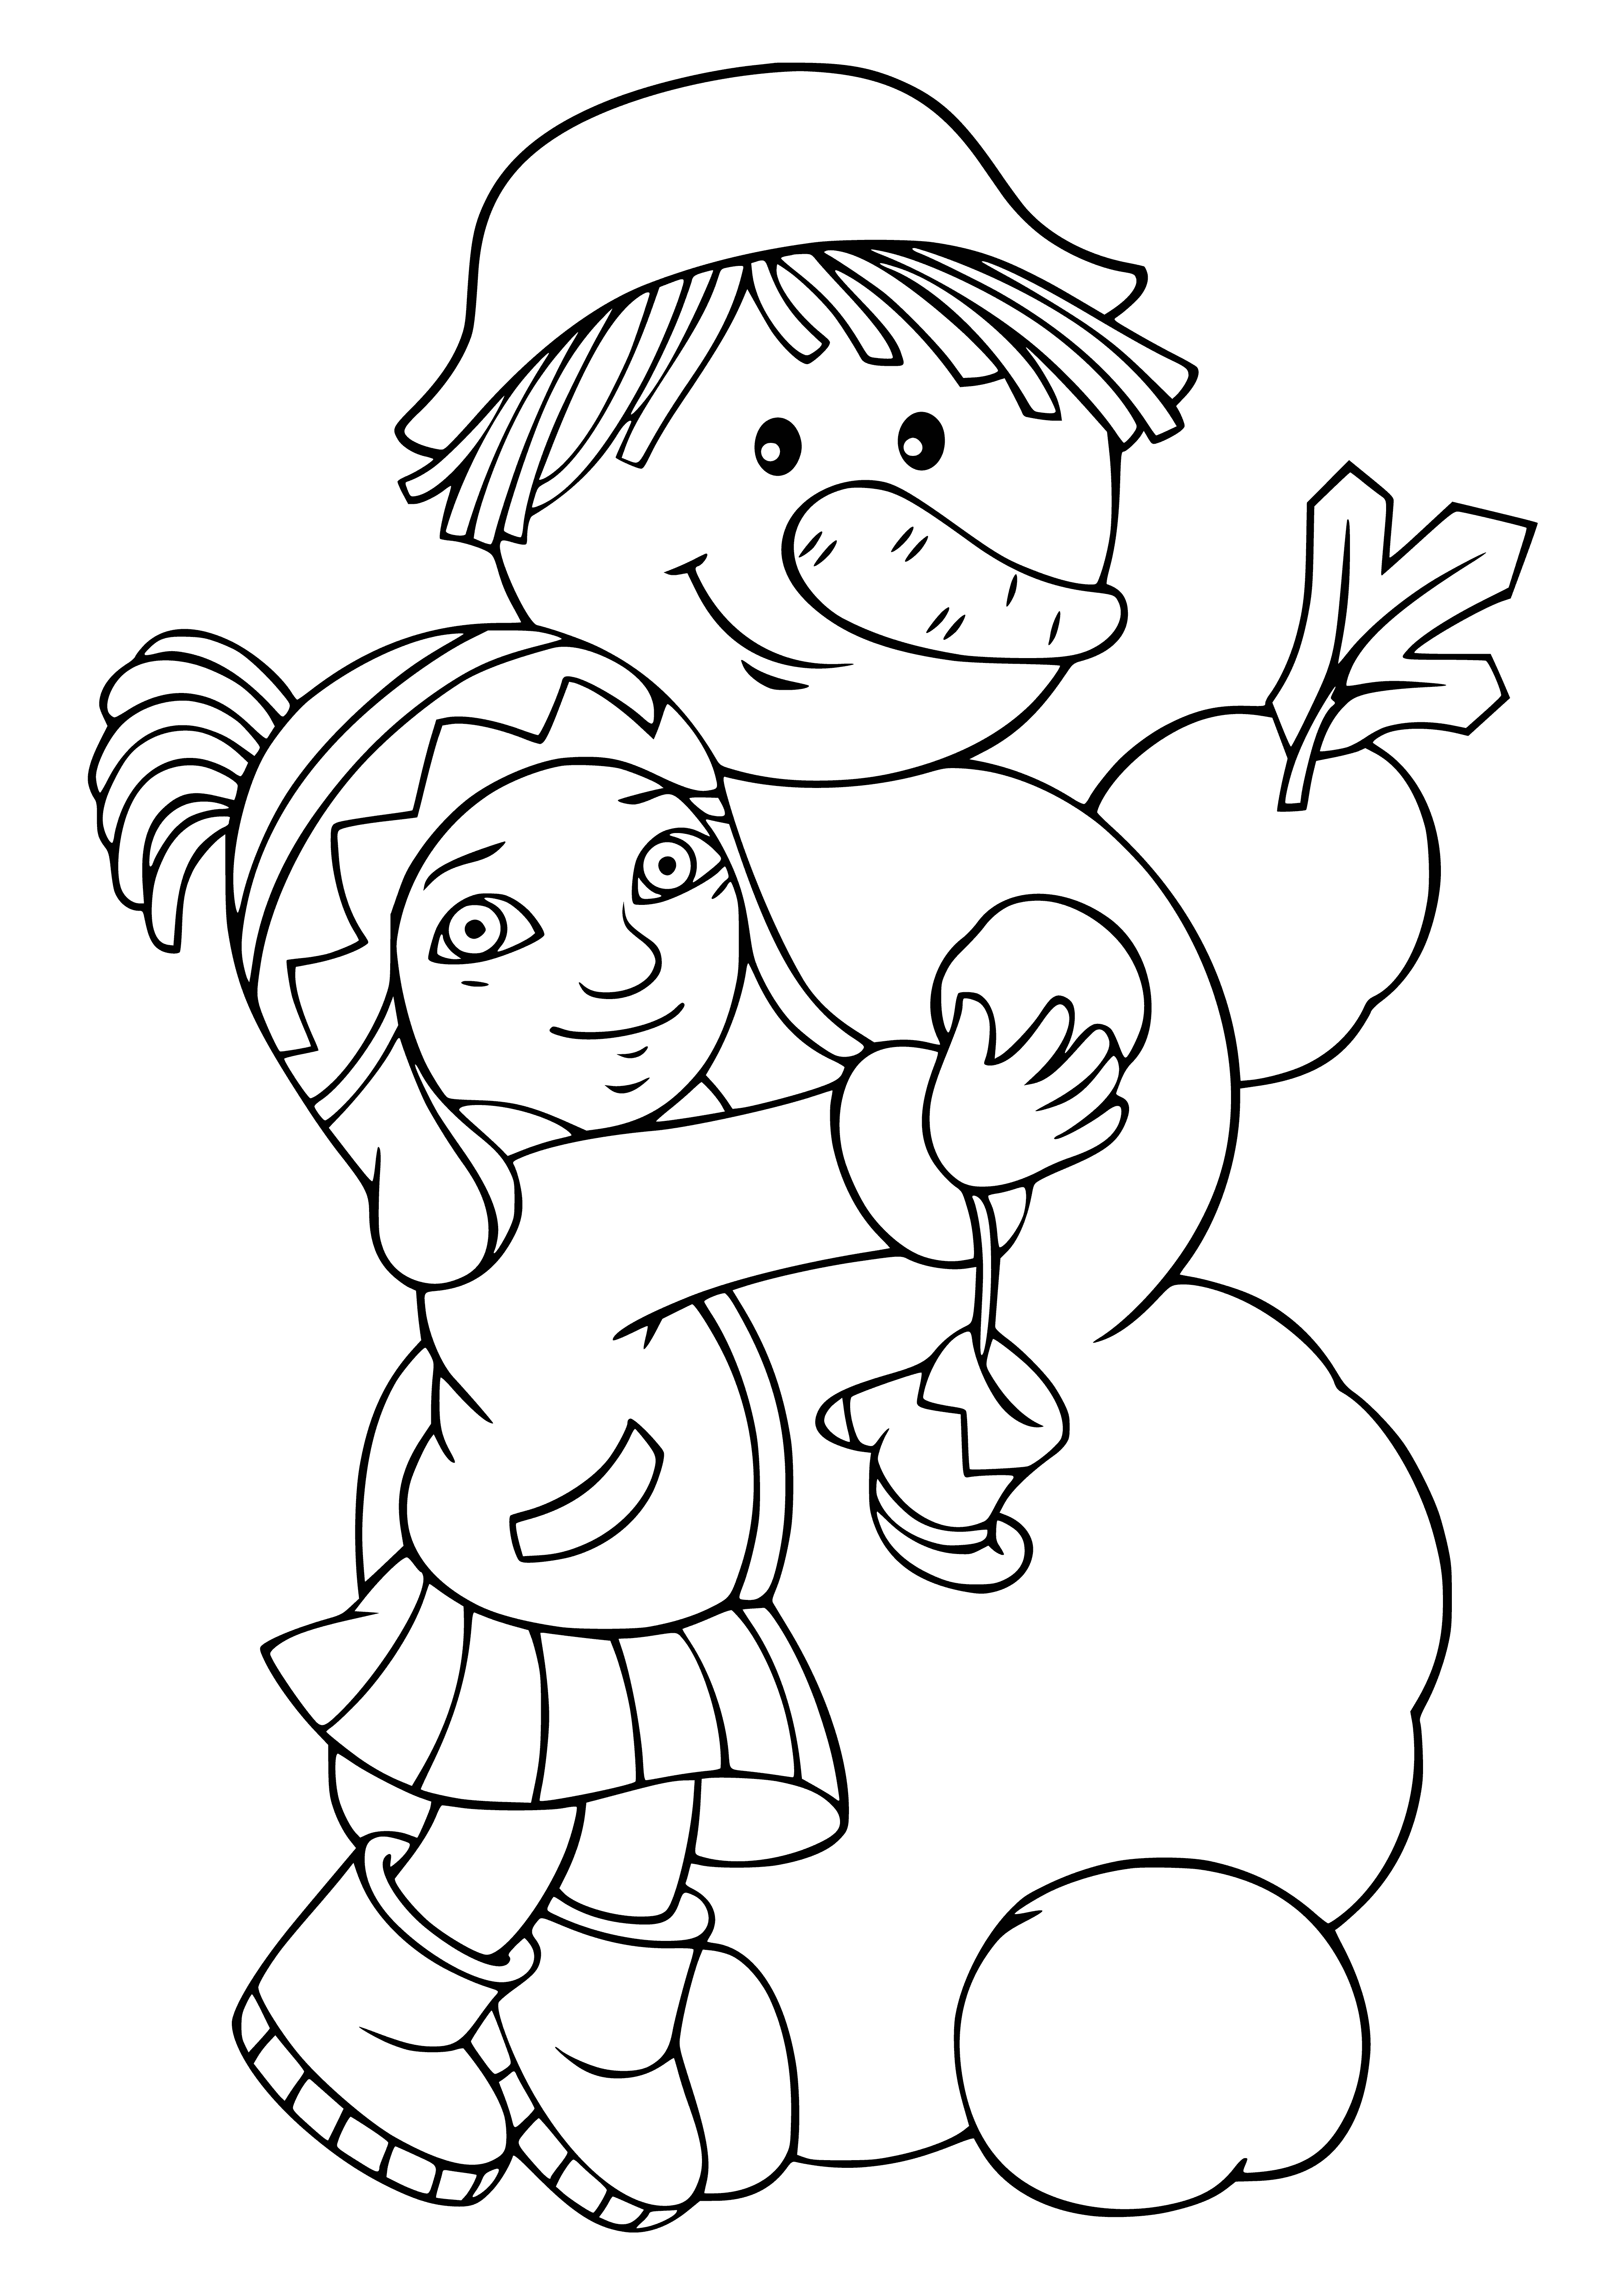 coloring page: Girl tobogganing down hill, snowman w/ carr. nose, coal eyes & buttons. Girl has scarf & hat. #winter #adventure